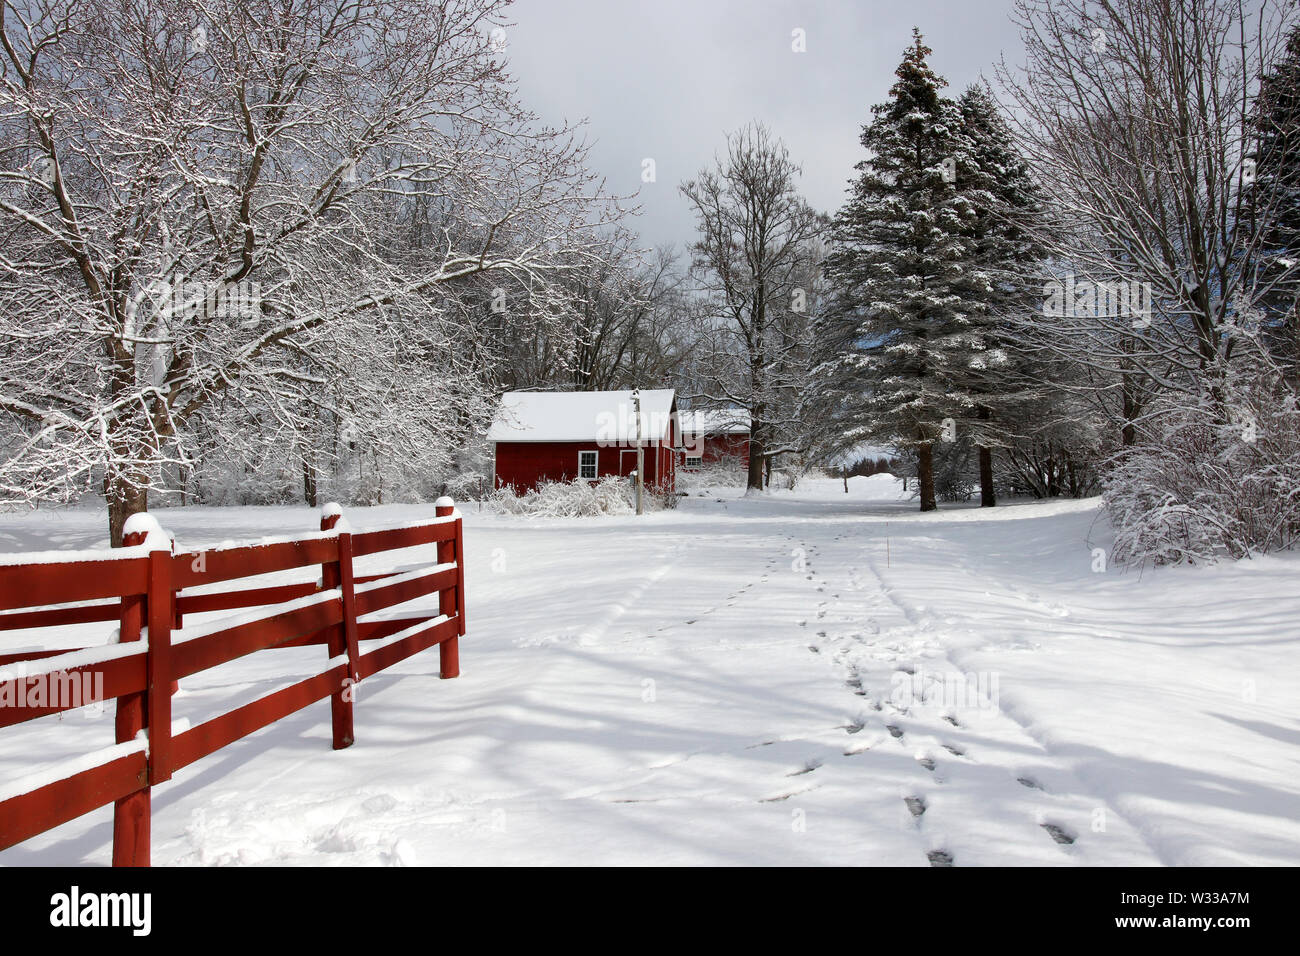 Rural landscape with red barns, wooden red fence, trees and road covered by fresh snow. Scenic winter view at Wisconsin, Midwest USA, Madison area. Stock Photo